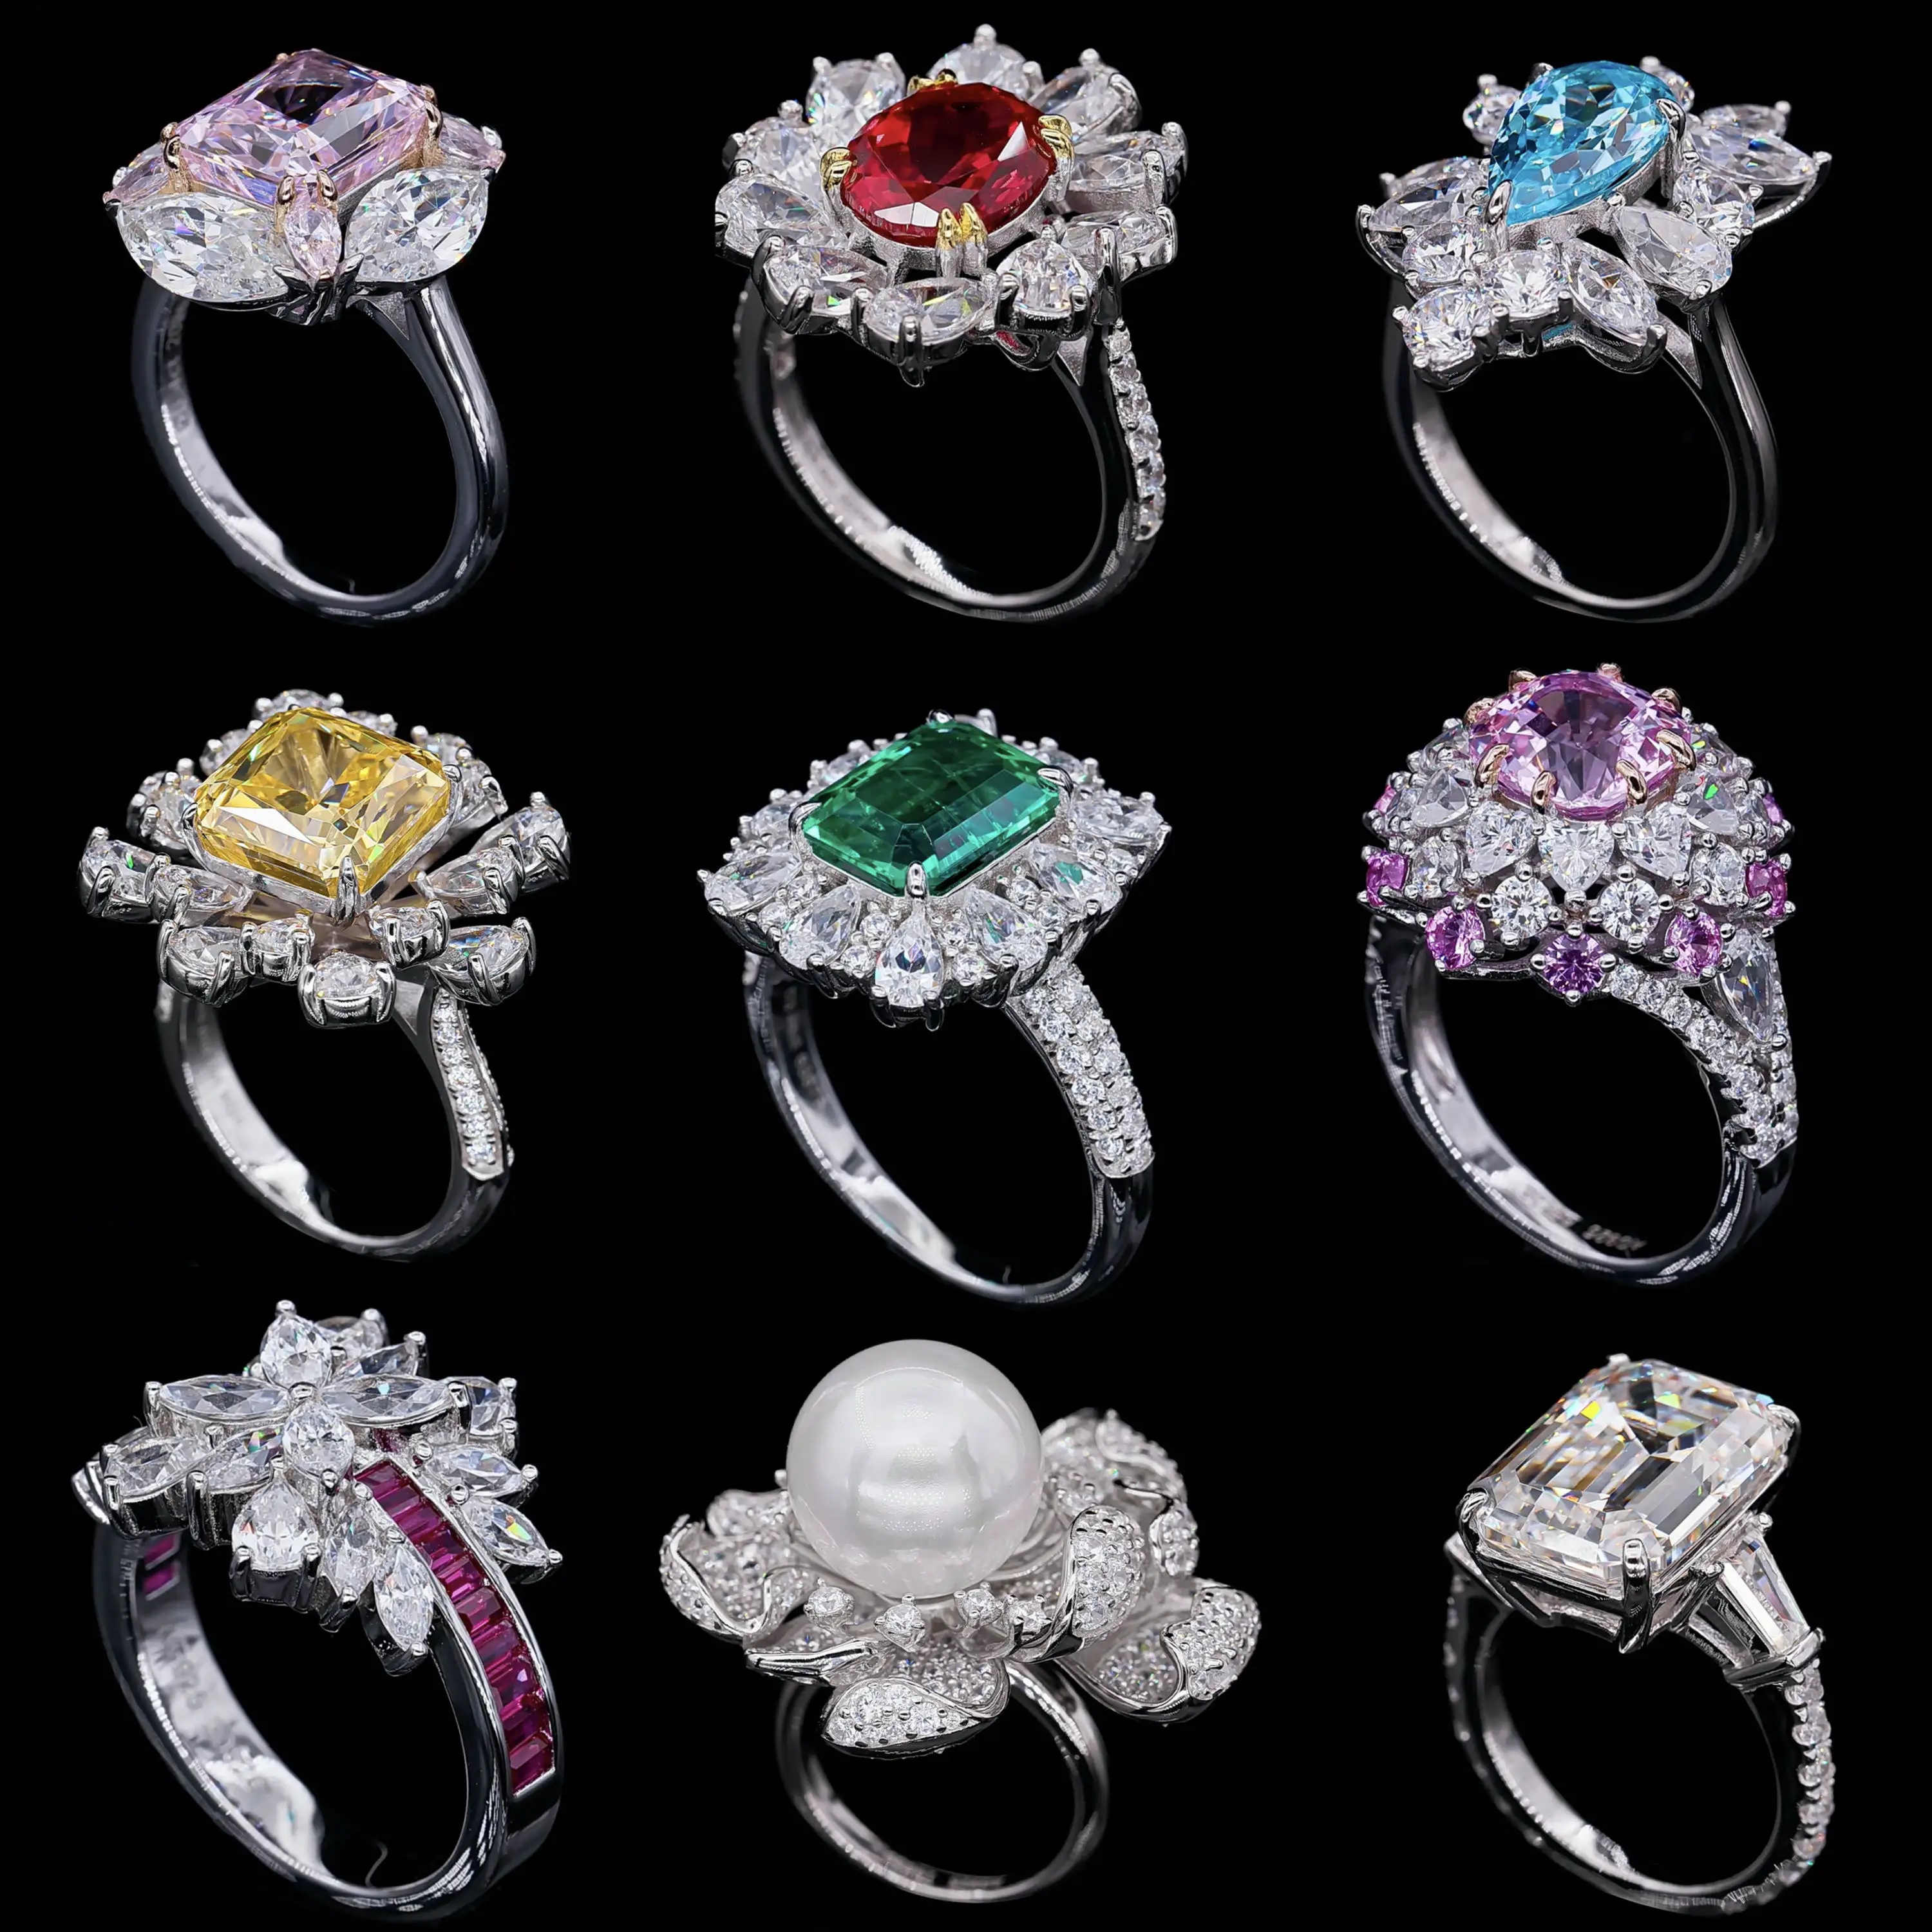 Rochime high end good quality luxury ring 925 sterling silver gold plated wedding engagement gemstone jewelry